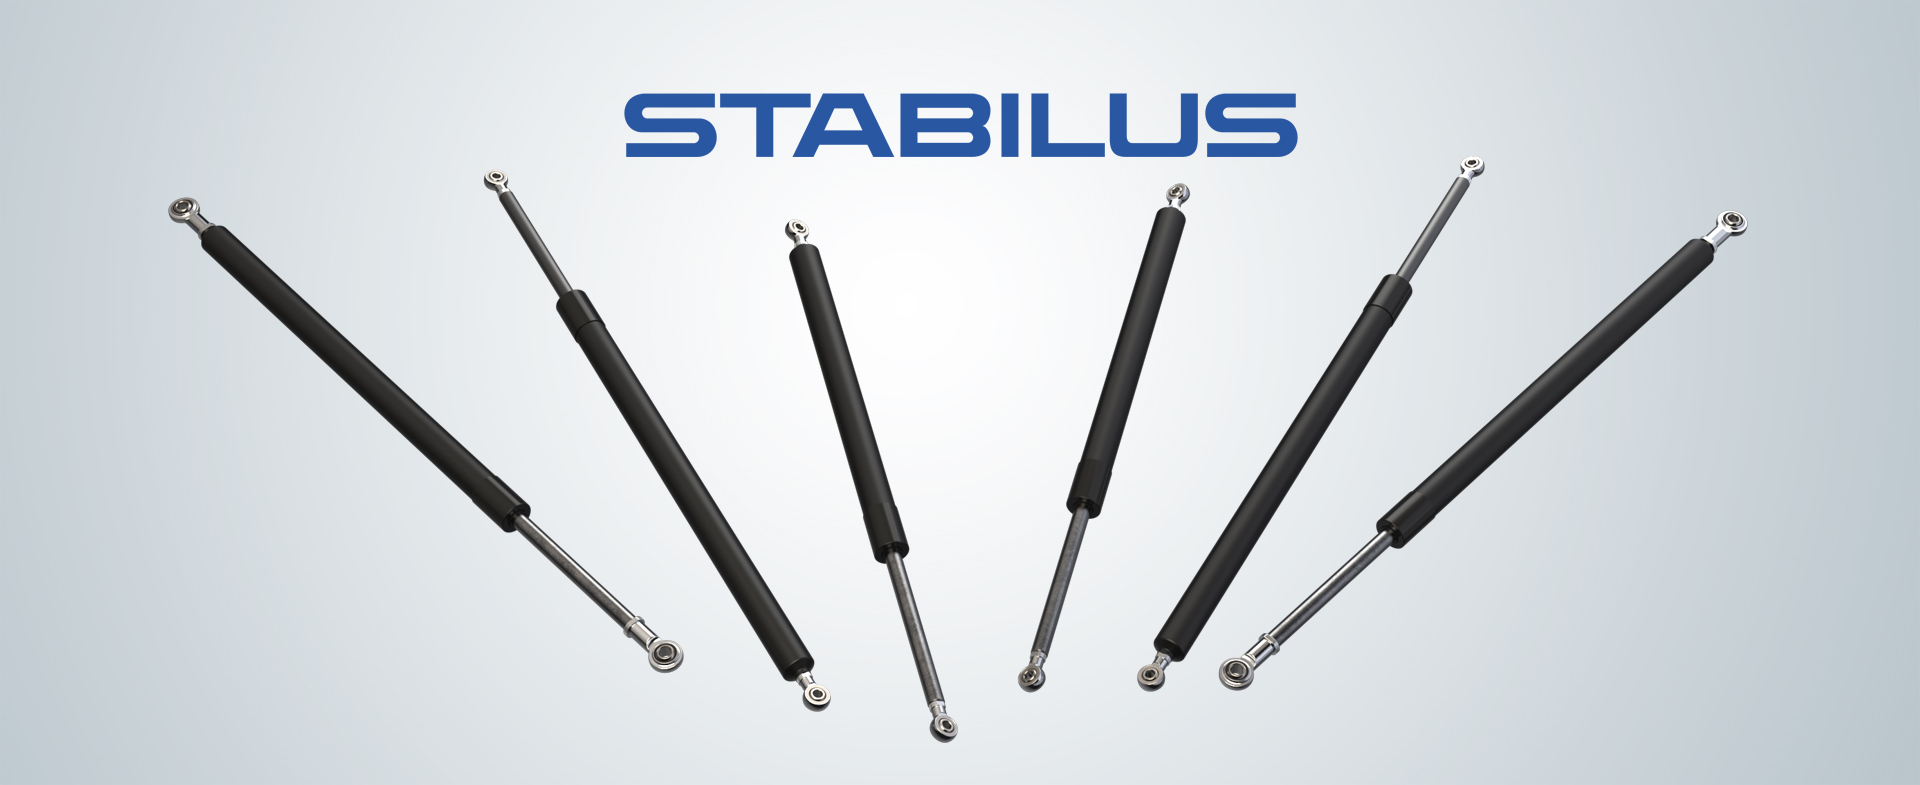 Automann joins hands with industry titan Stabilus